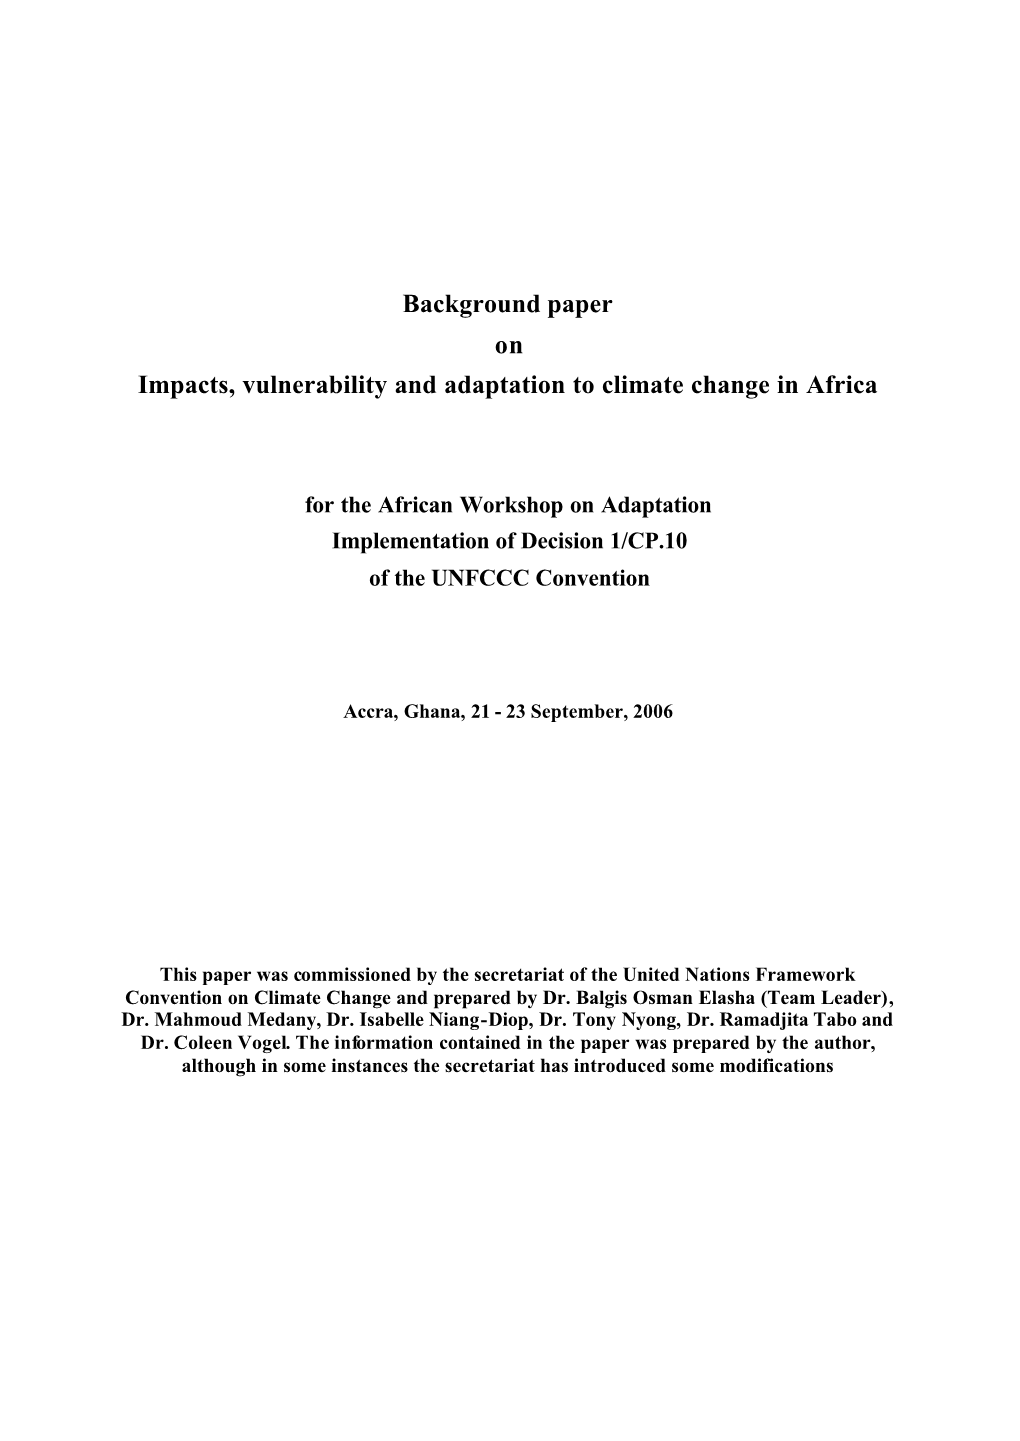 Background Paper on Impacts, Vulnerability and Adaptation to Climate Change in Africa